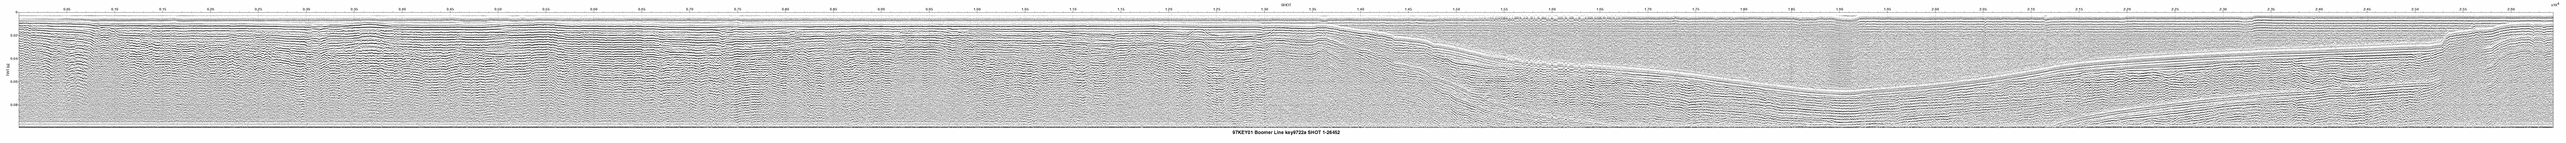 Thumbnail GIF image of the seismic trackline key9722a, with a hotlink to the more detailed, larger JPG image.